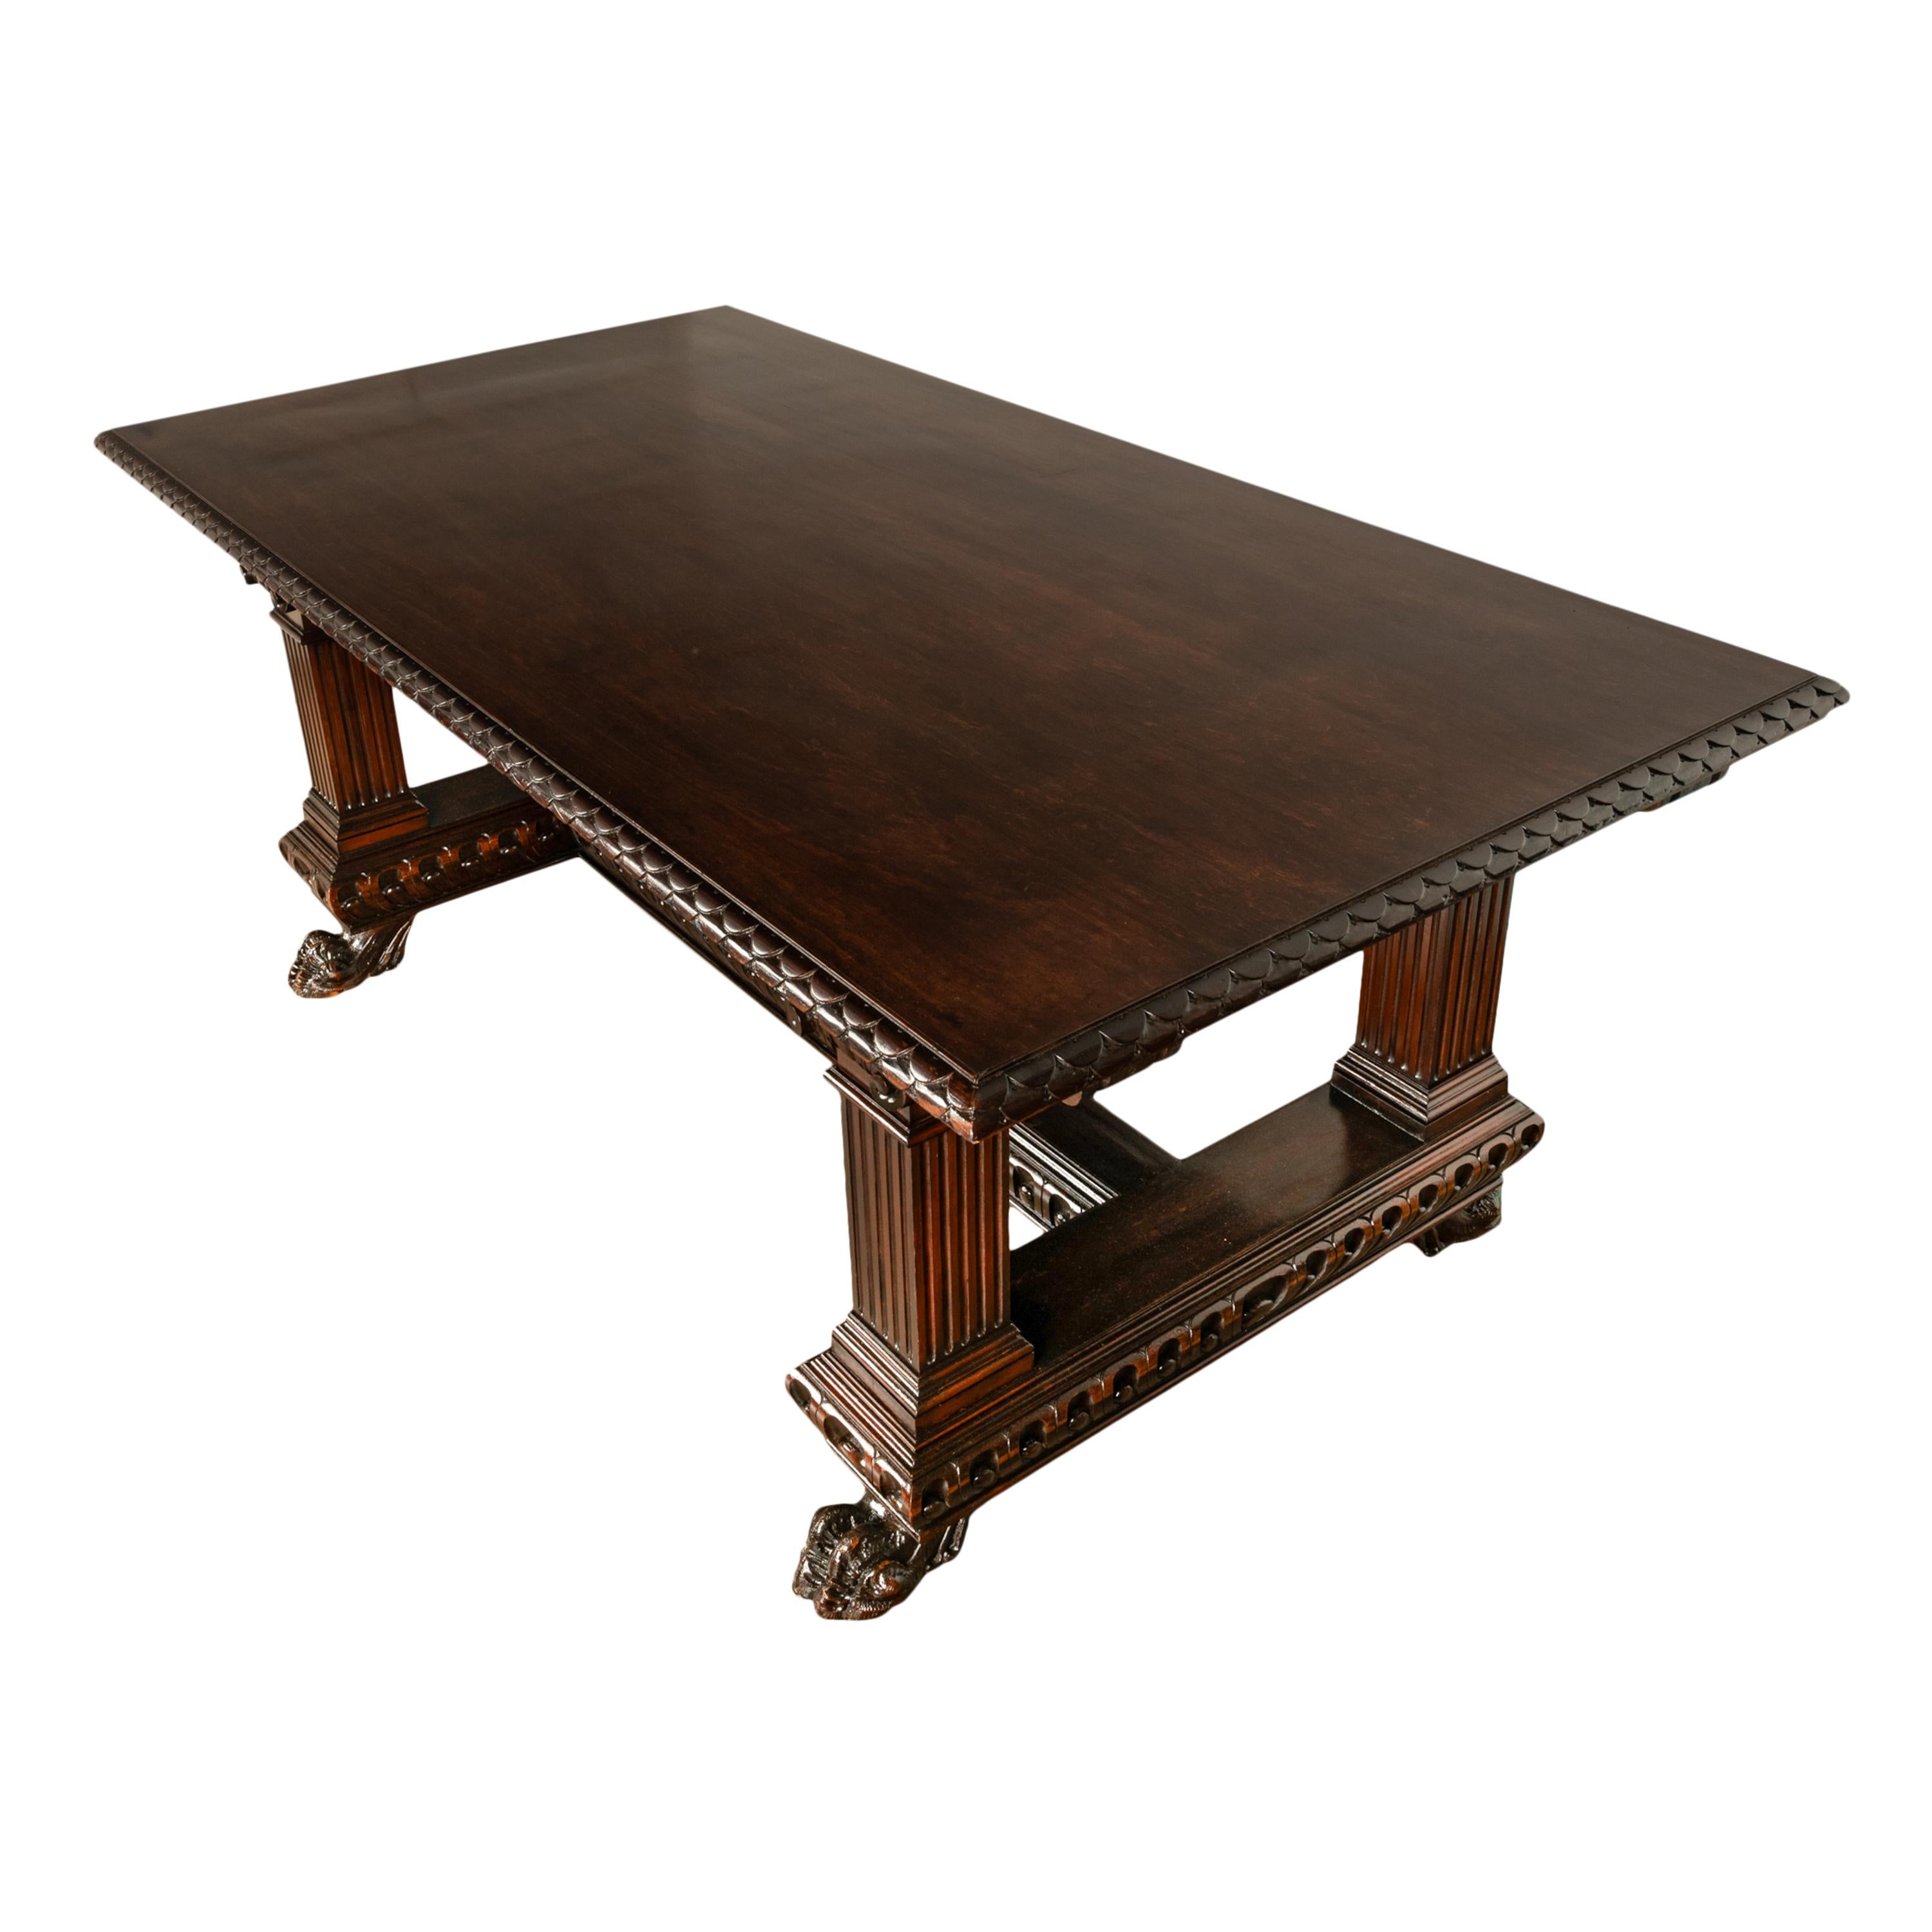 Antique Italian Carved Renaissance Revival Walnut Library Dining Table 1880 For Sale 5